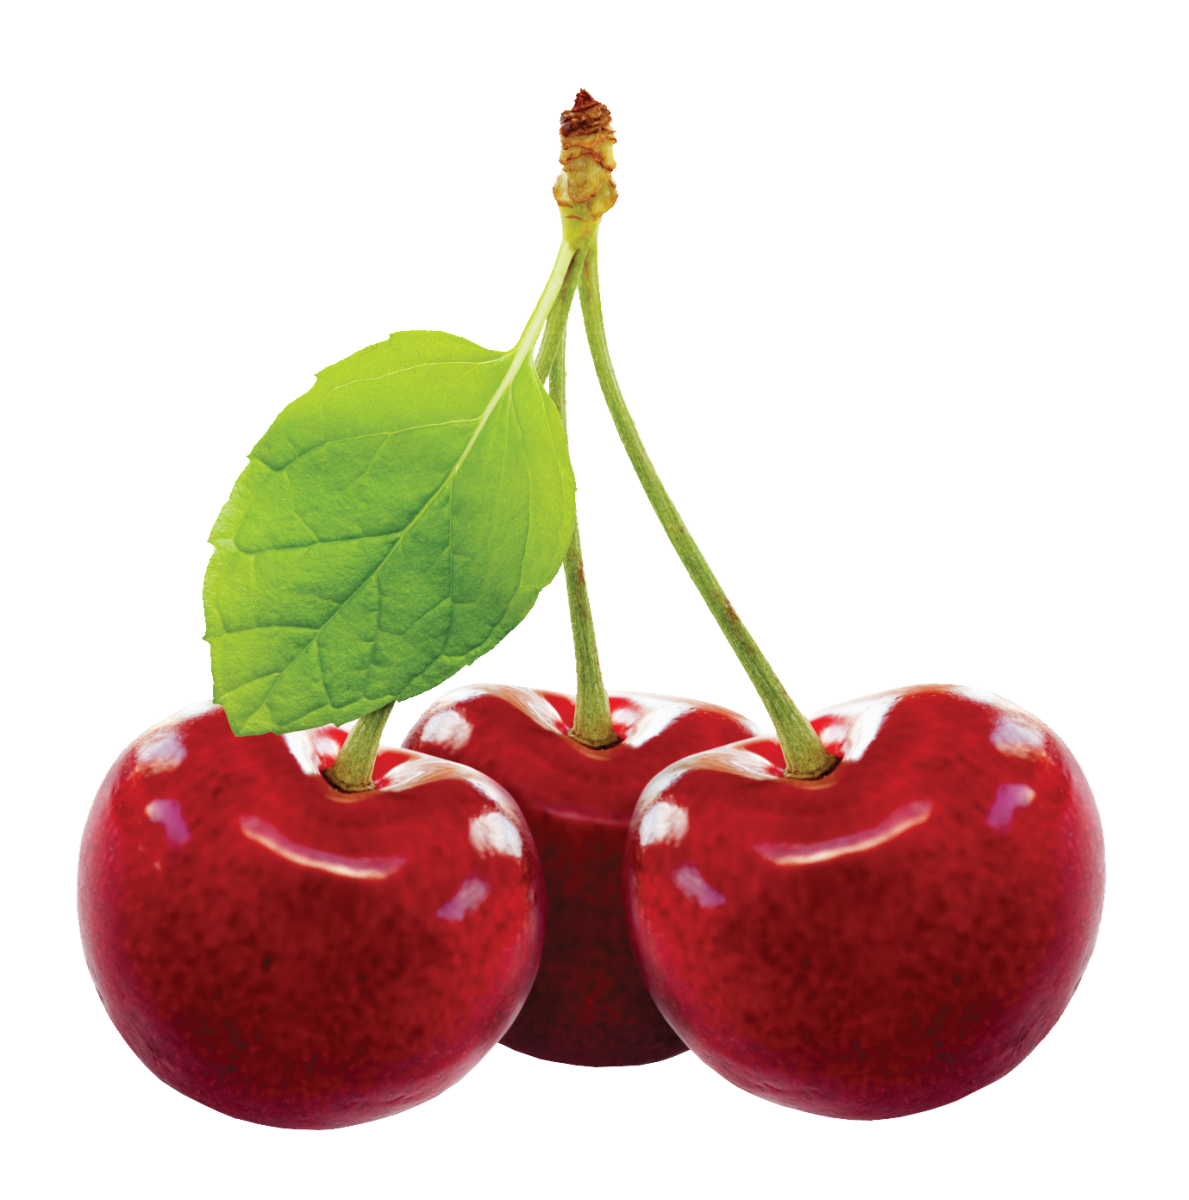 Cherry Fruit Image PNG Image